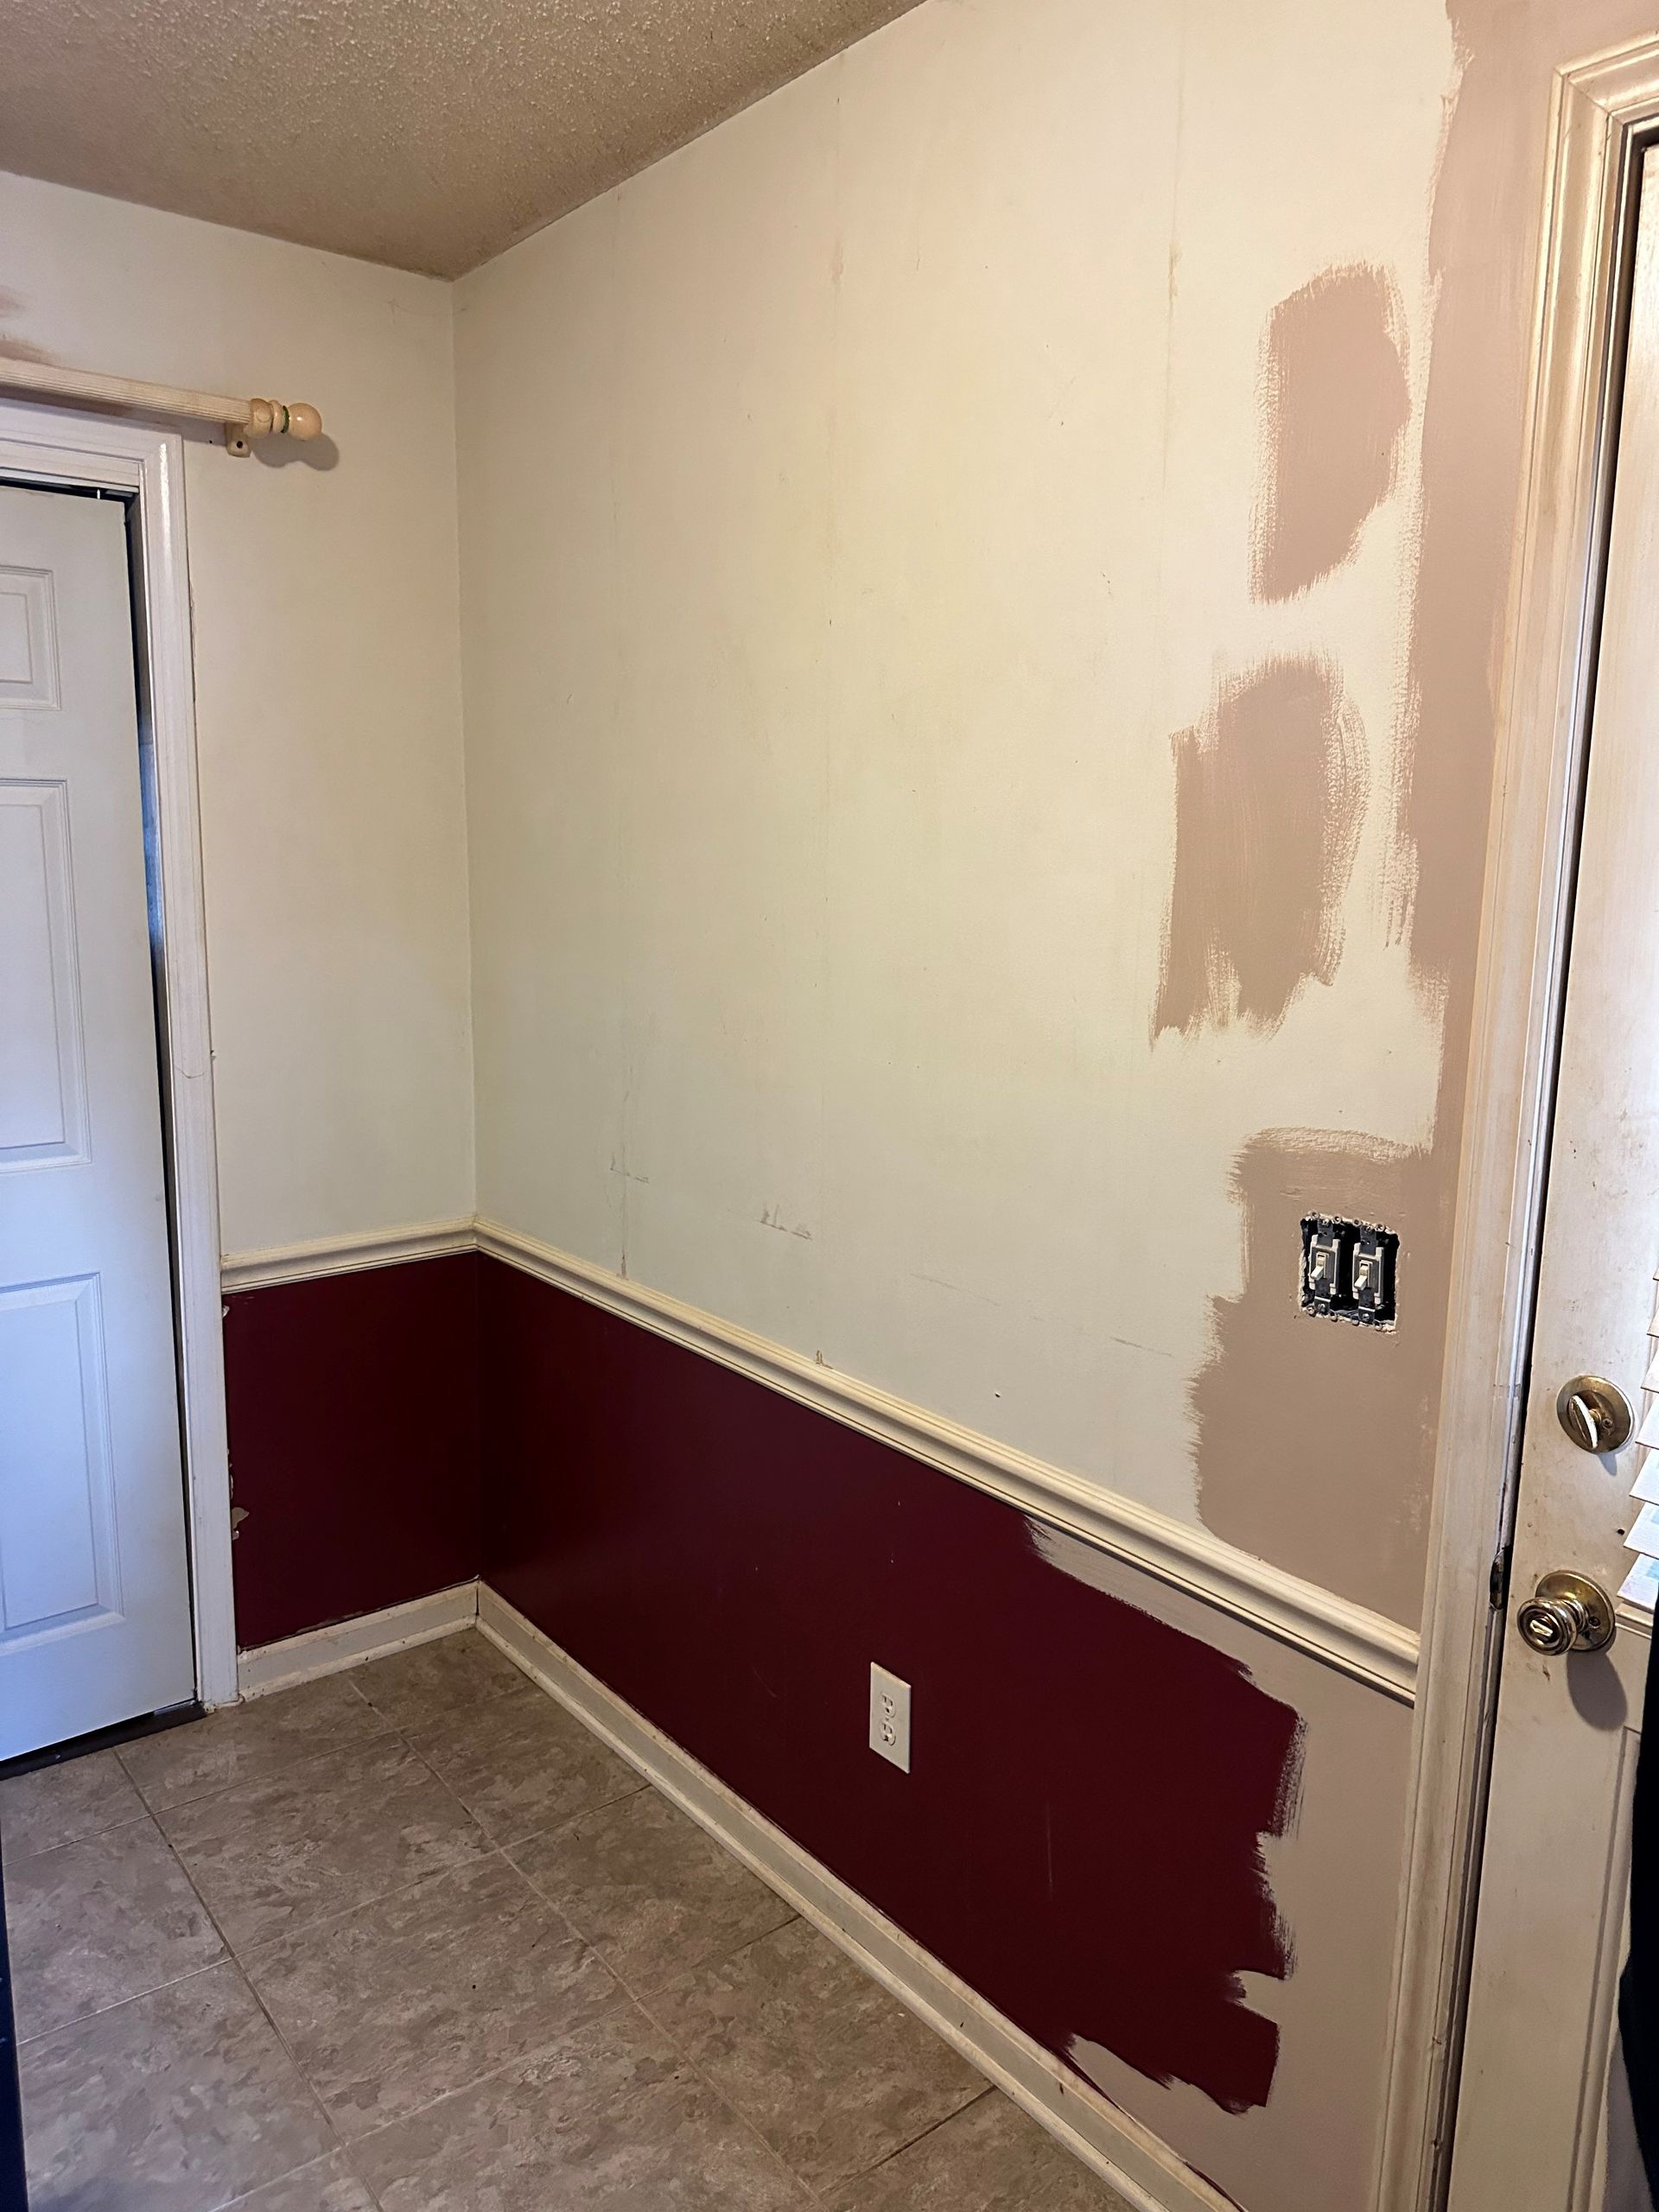 Before New Interior Paint - A & A Painting & 